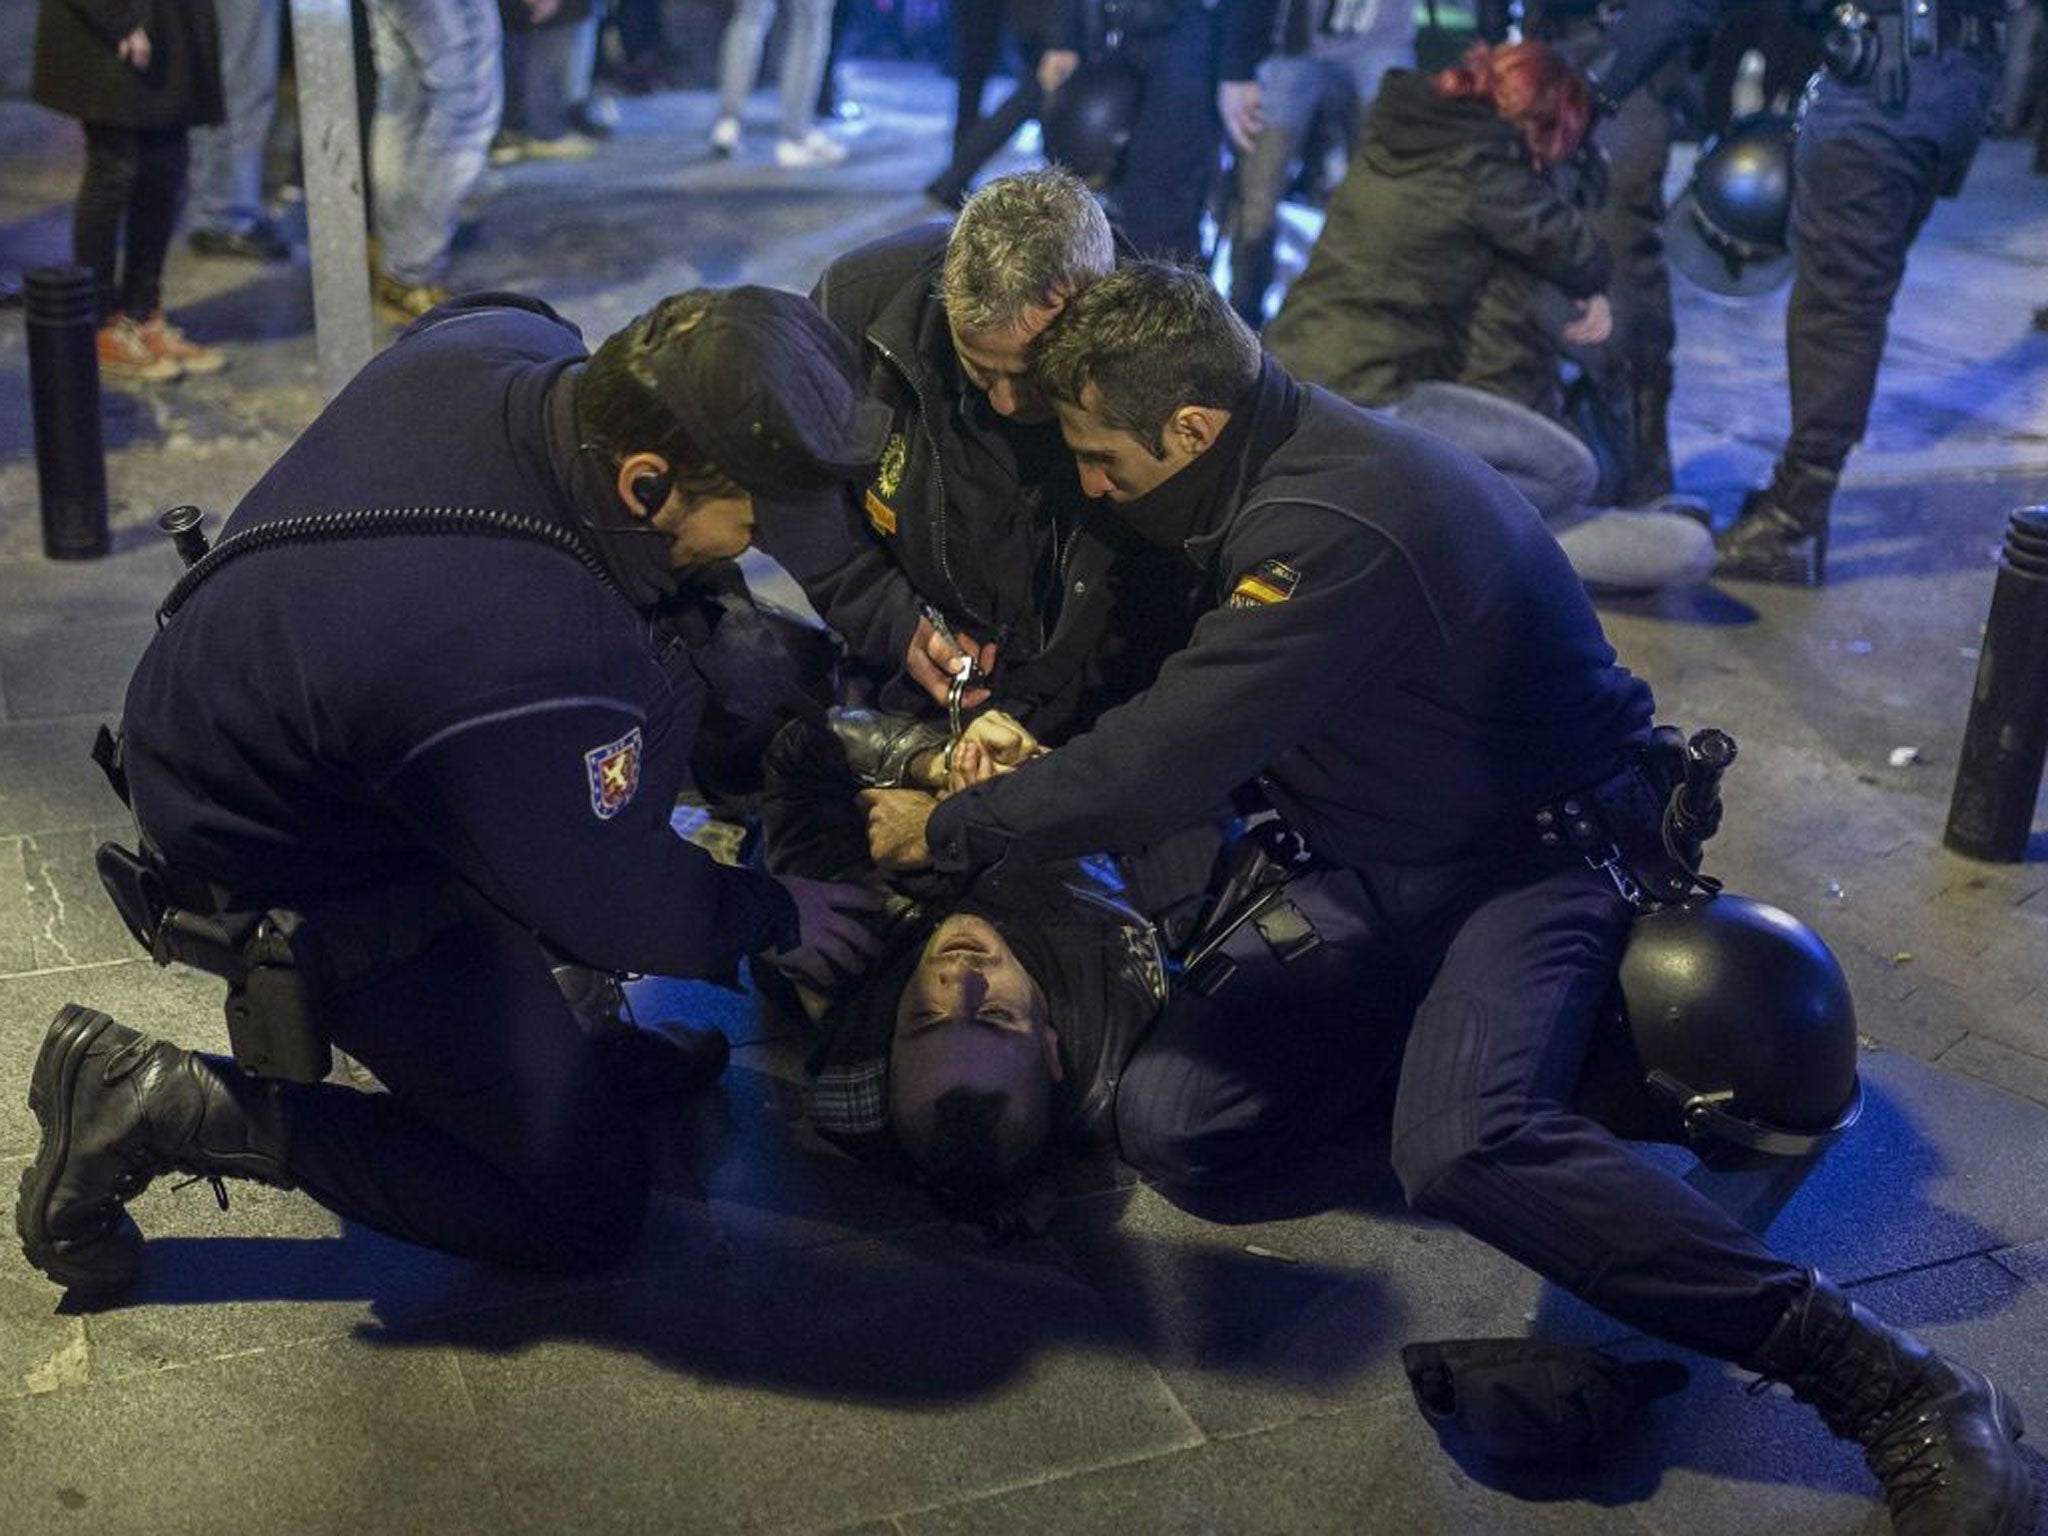 Riot policemen arrest a demonstrater during a protest against government over issues of abortion in Madrid, Spain, Friday, 20 2013.